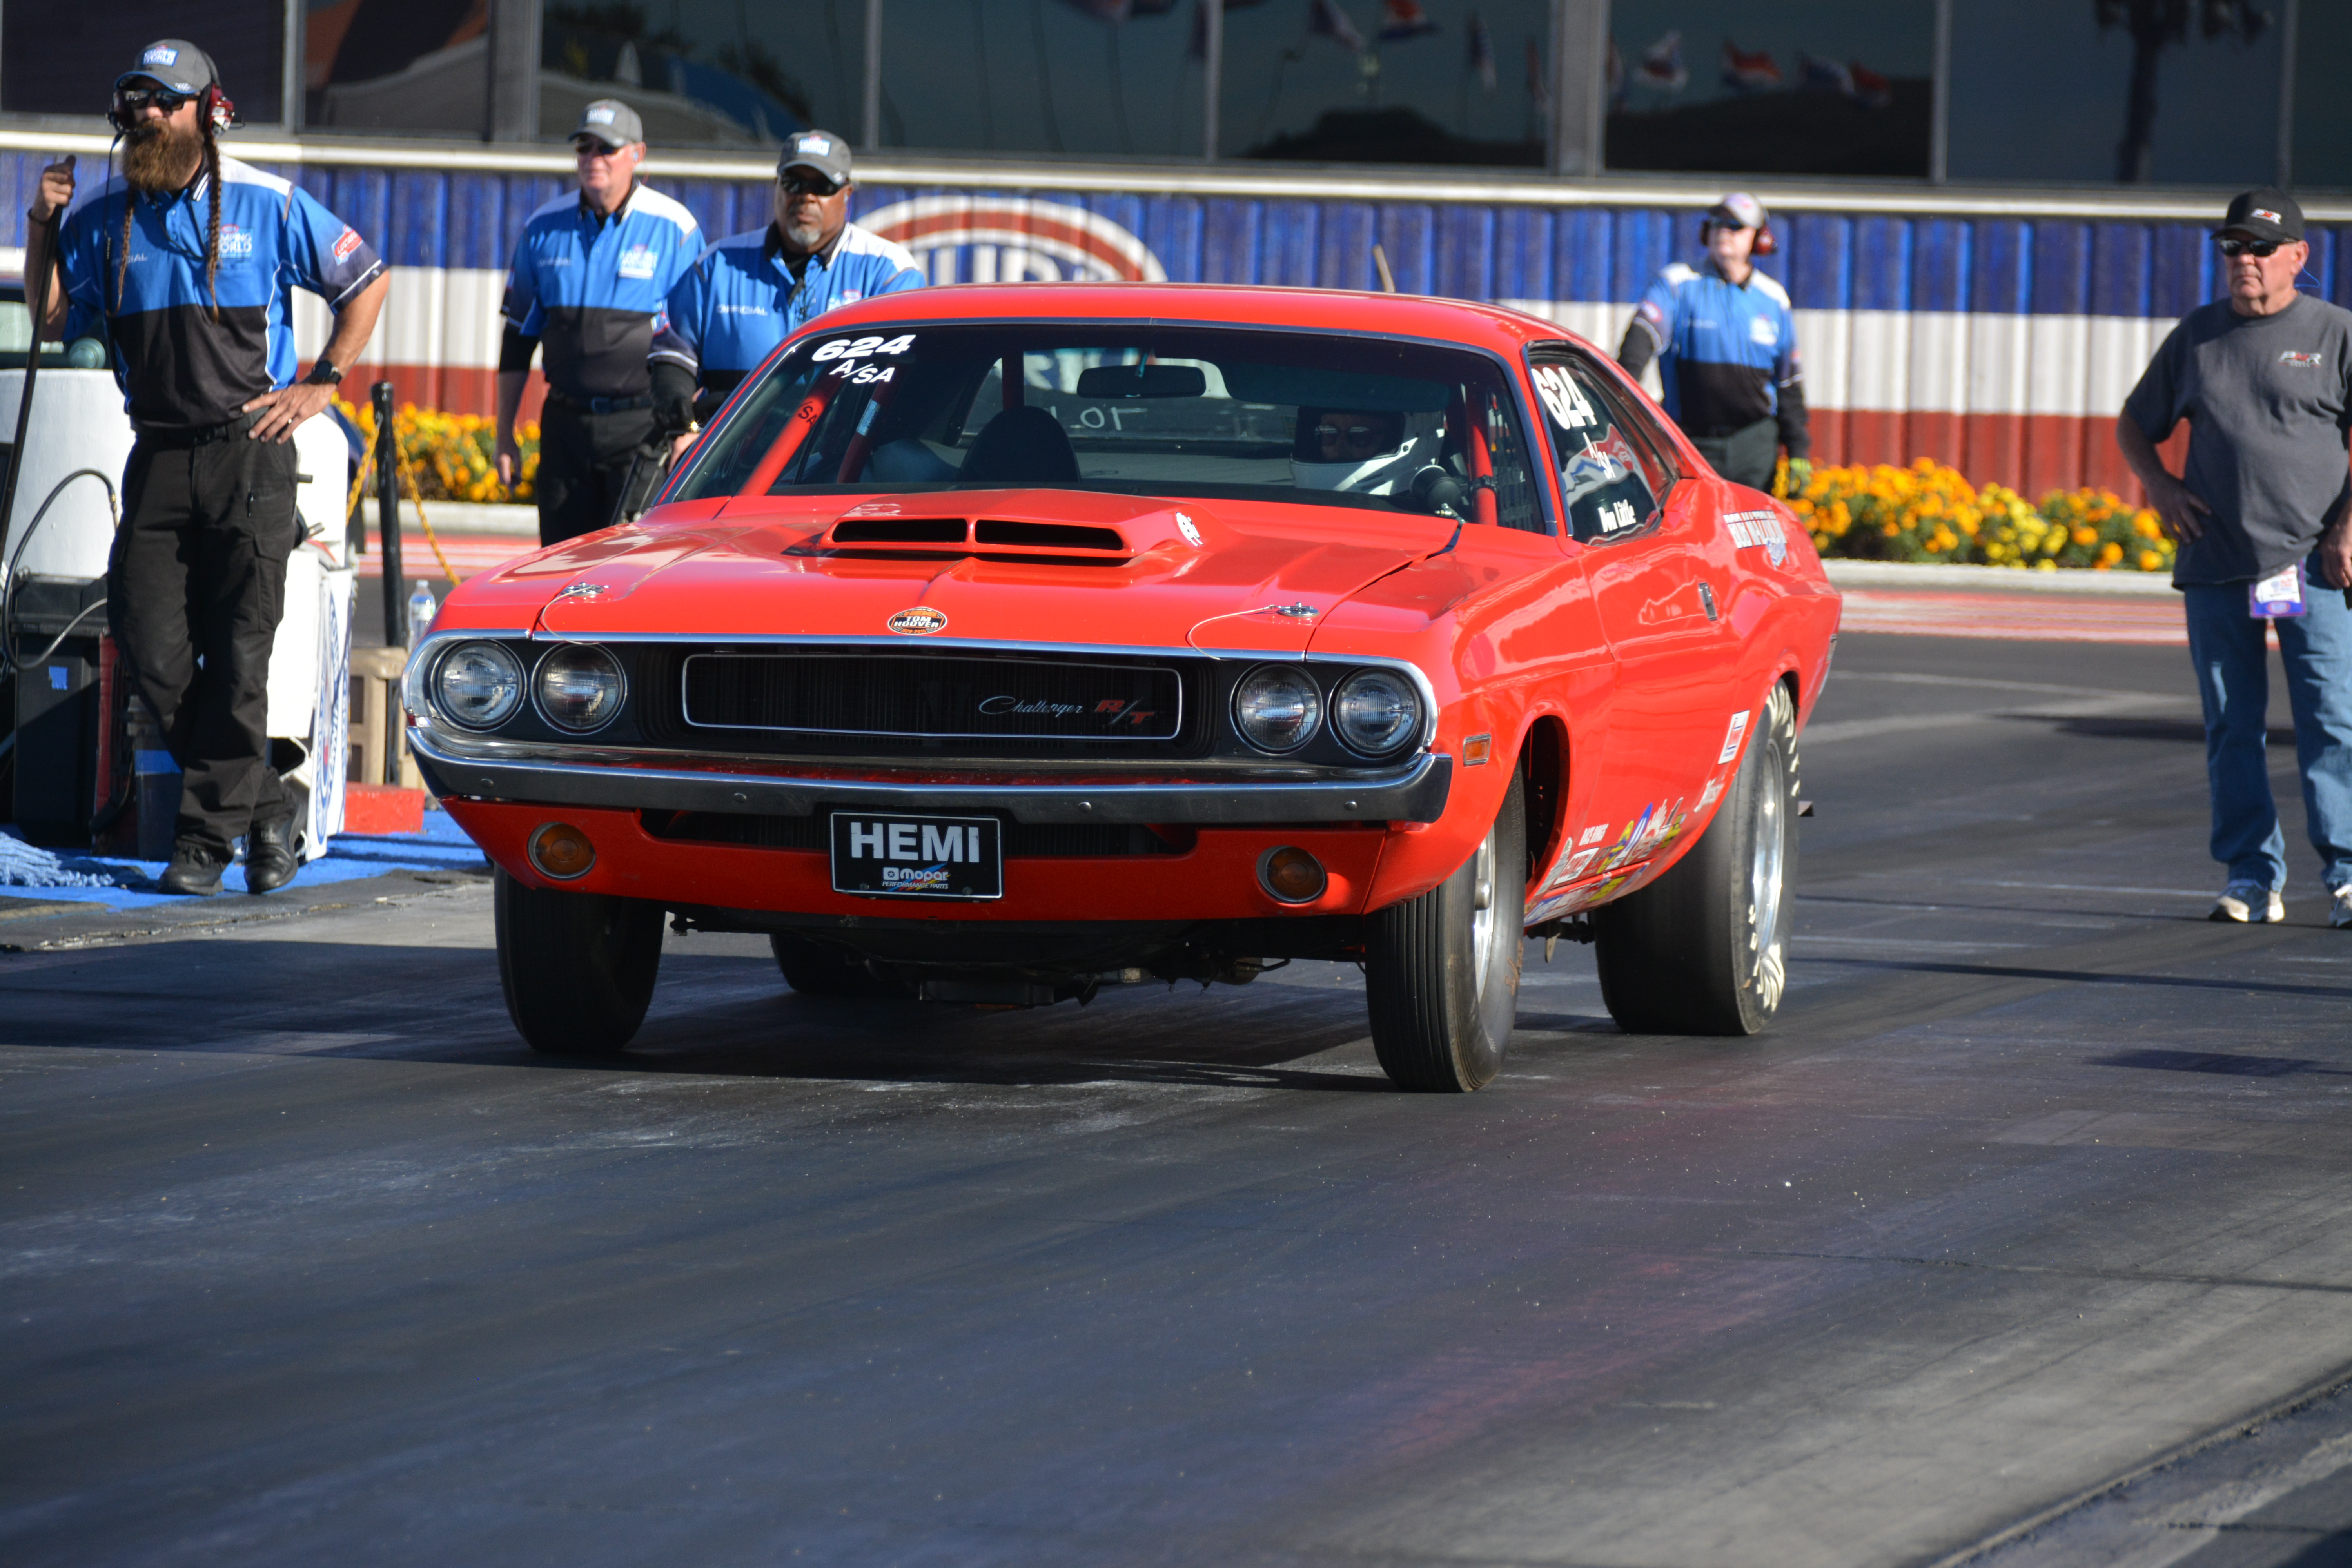 Vehicle heading to the starting line of a drag strip